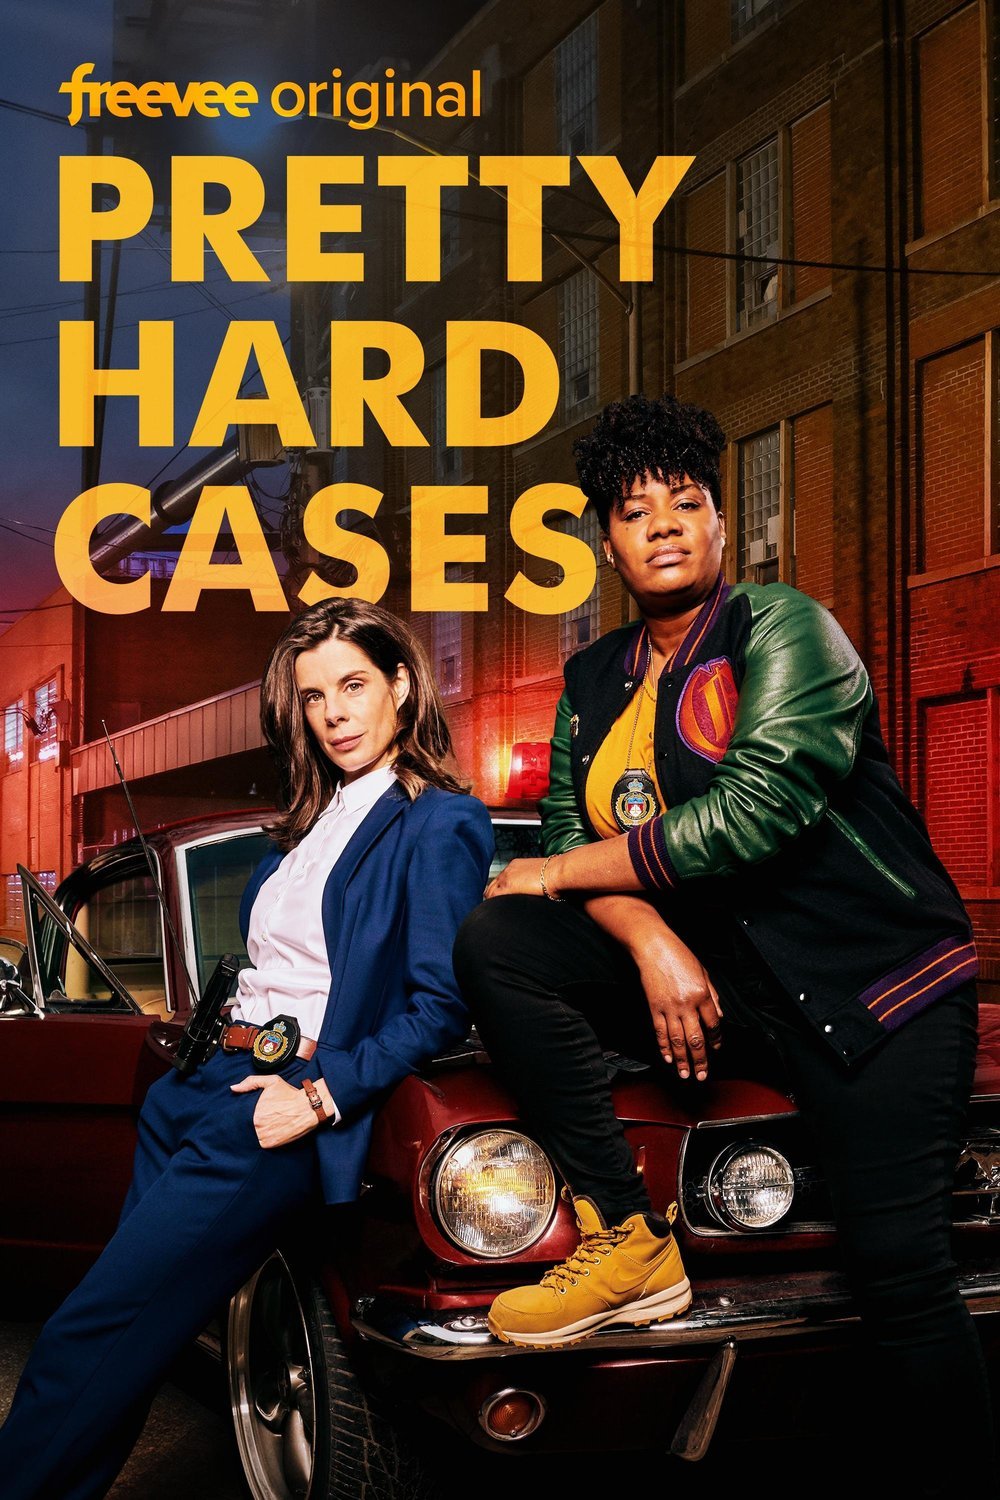 Poster of the movie Pretty Hard Cases